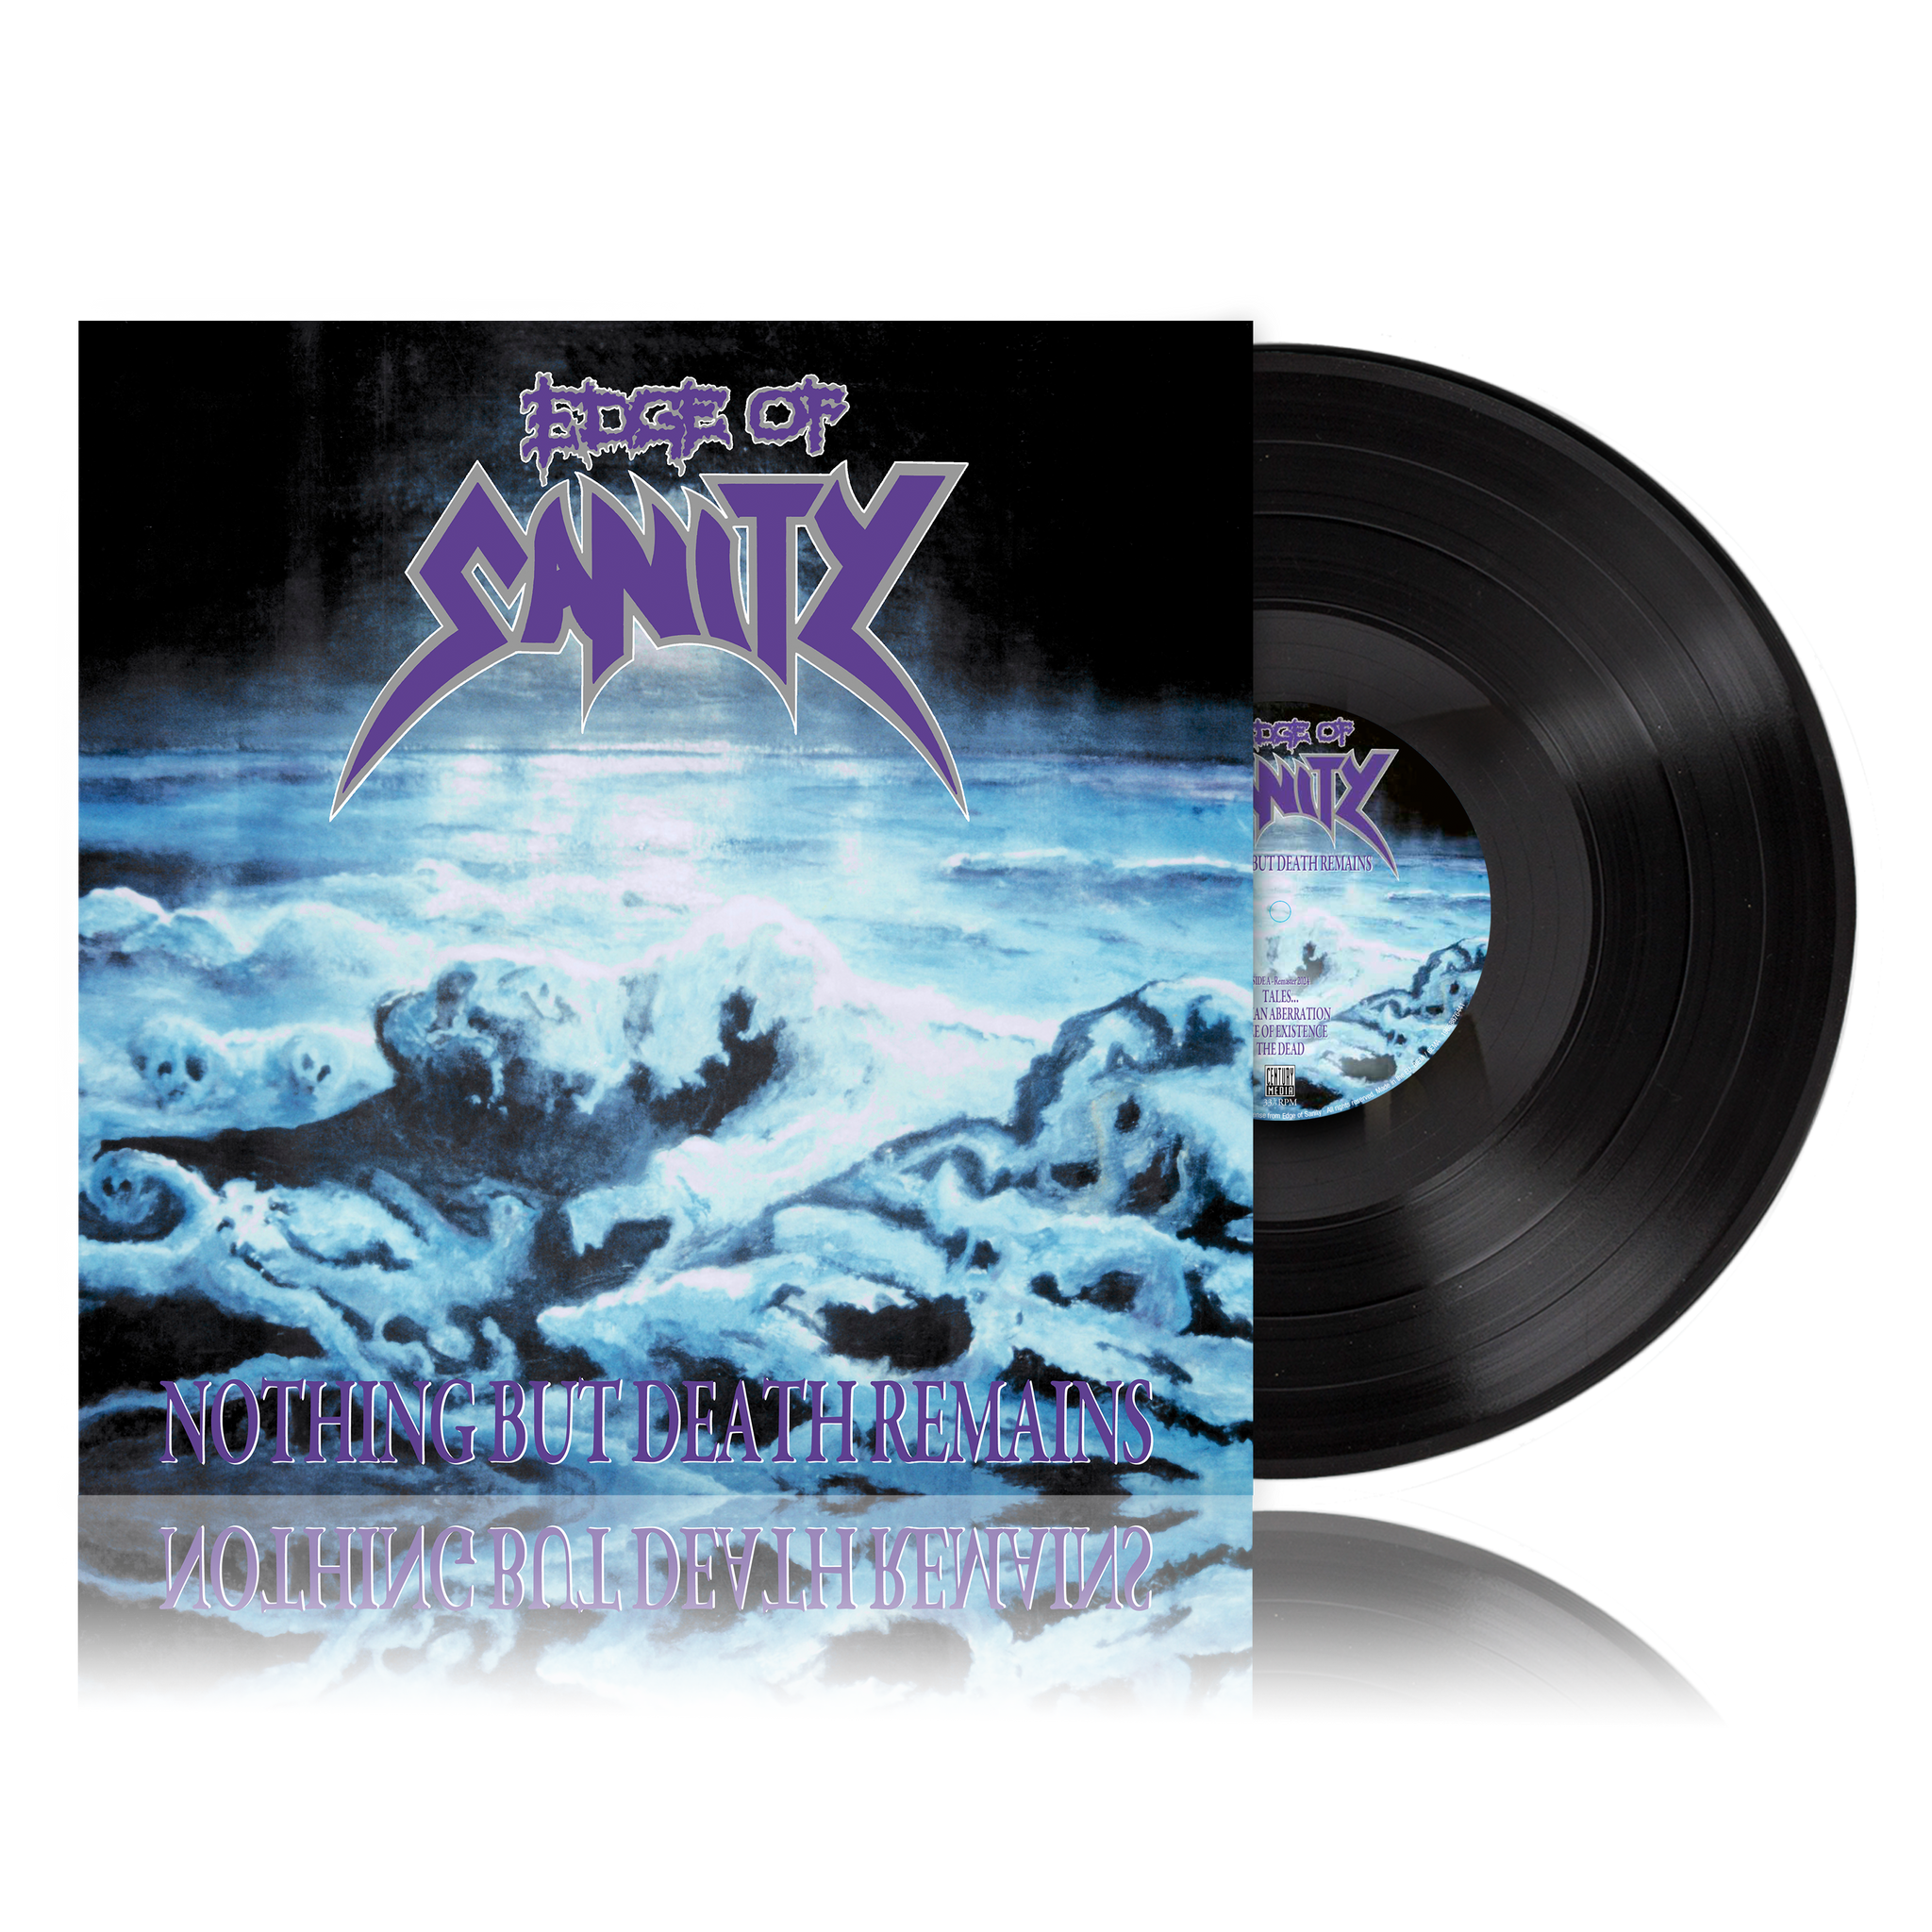 Edge of Sanity - Nothing But Death Remains (Re-issue) - Black Vinyl LP